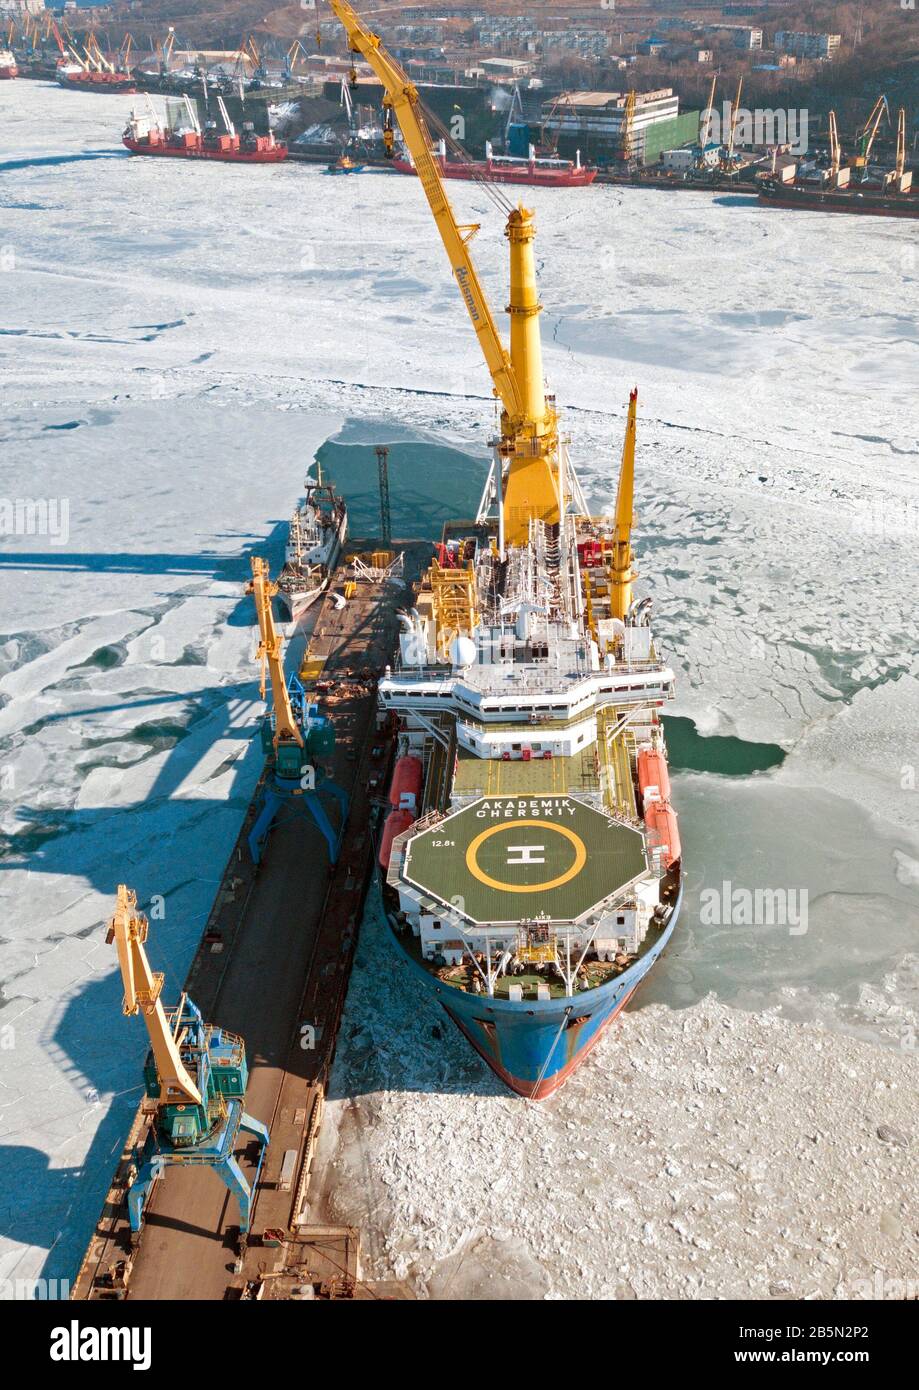 Nakhodka, Russia - February 06, 2020: Crane-laying pipe-laying vessel Academic Chersky former Jackson 18, a ship owned by Gazprom Stock Photo